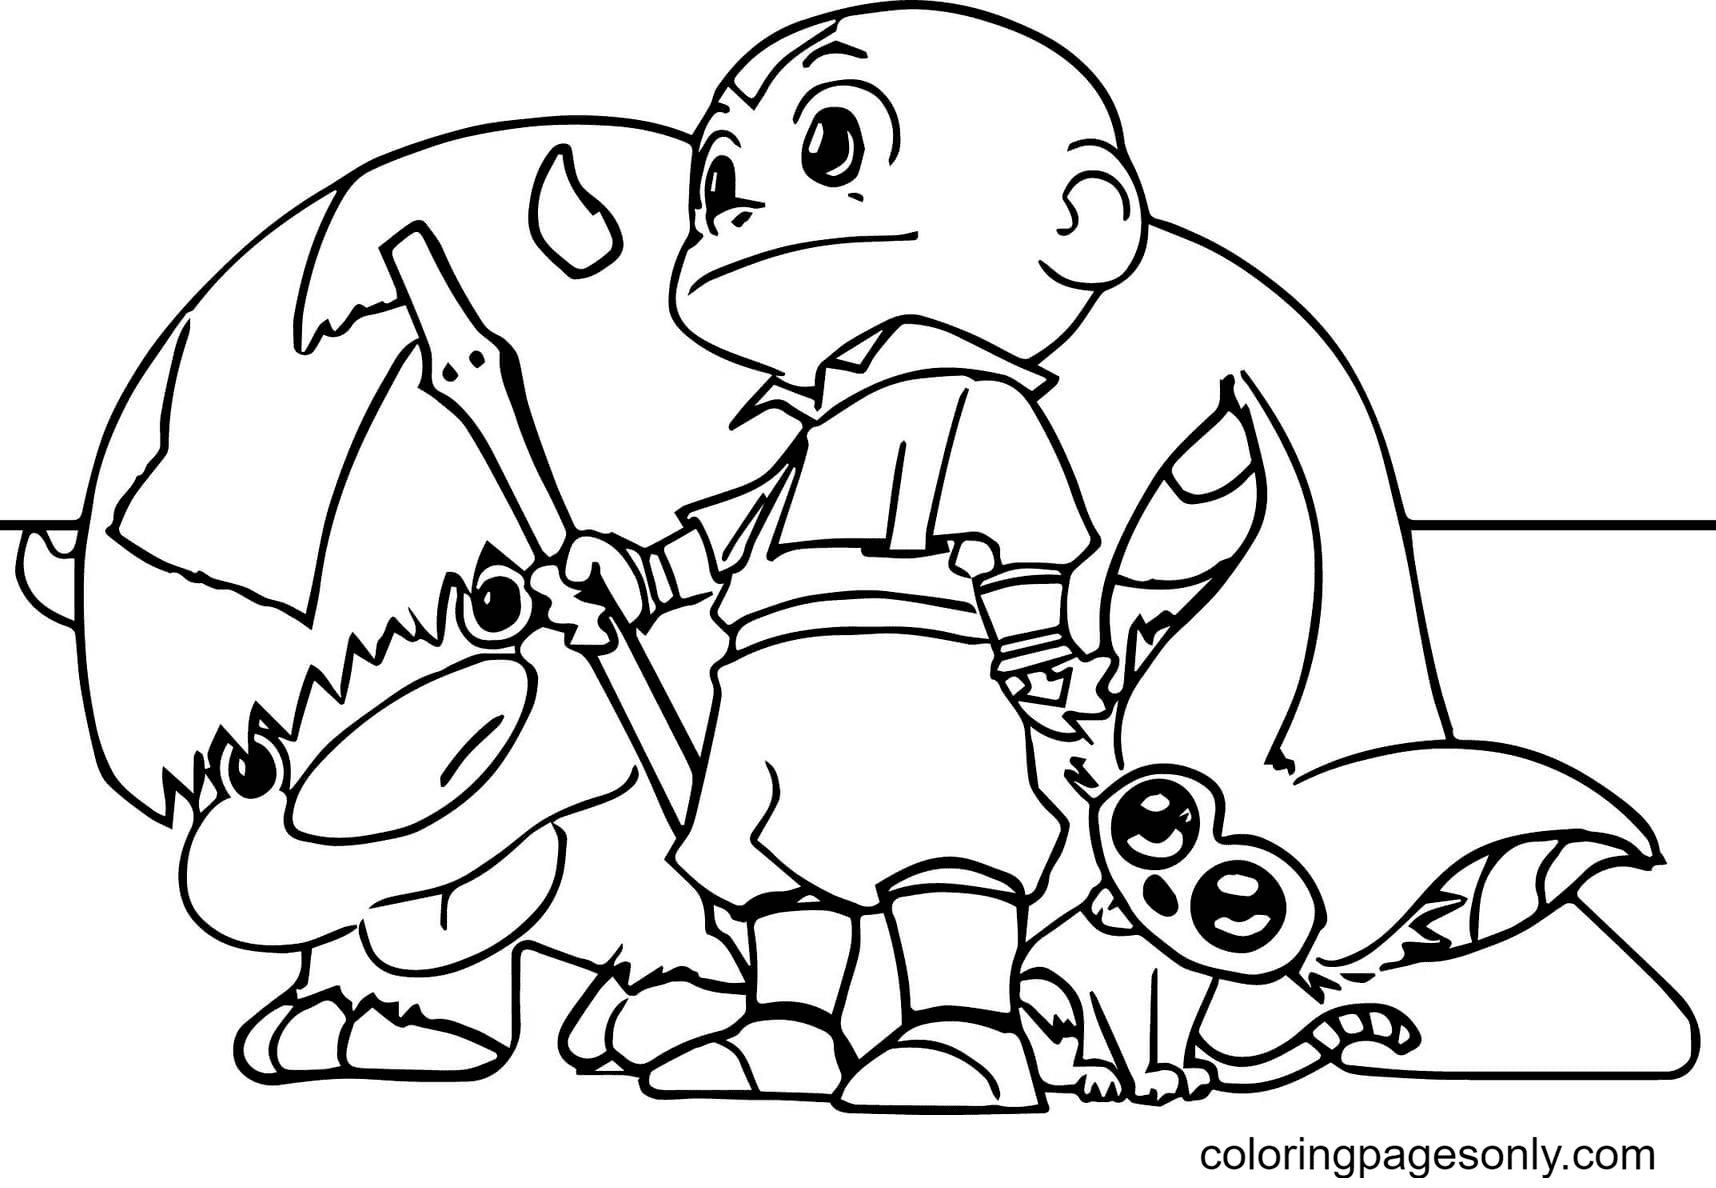 Appa, Aang and Momo Coloring Pages